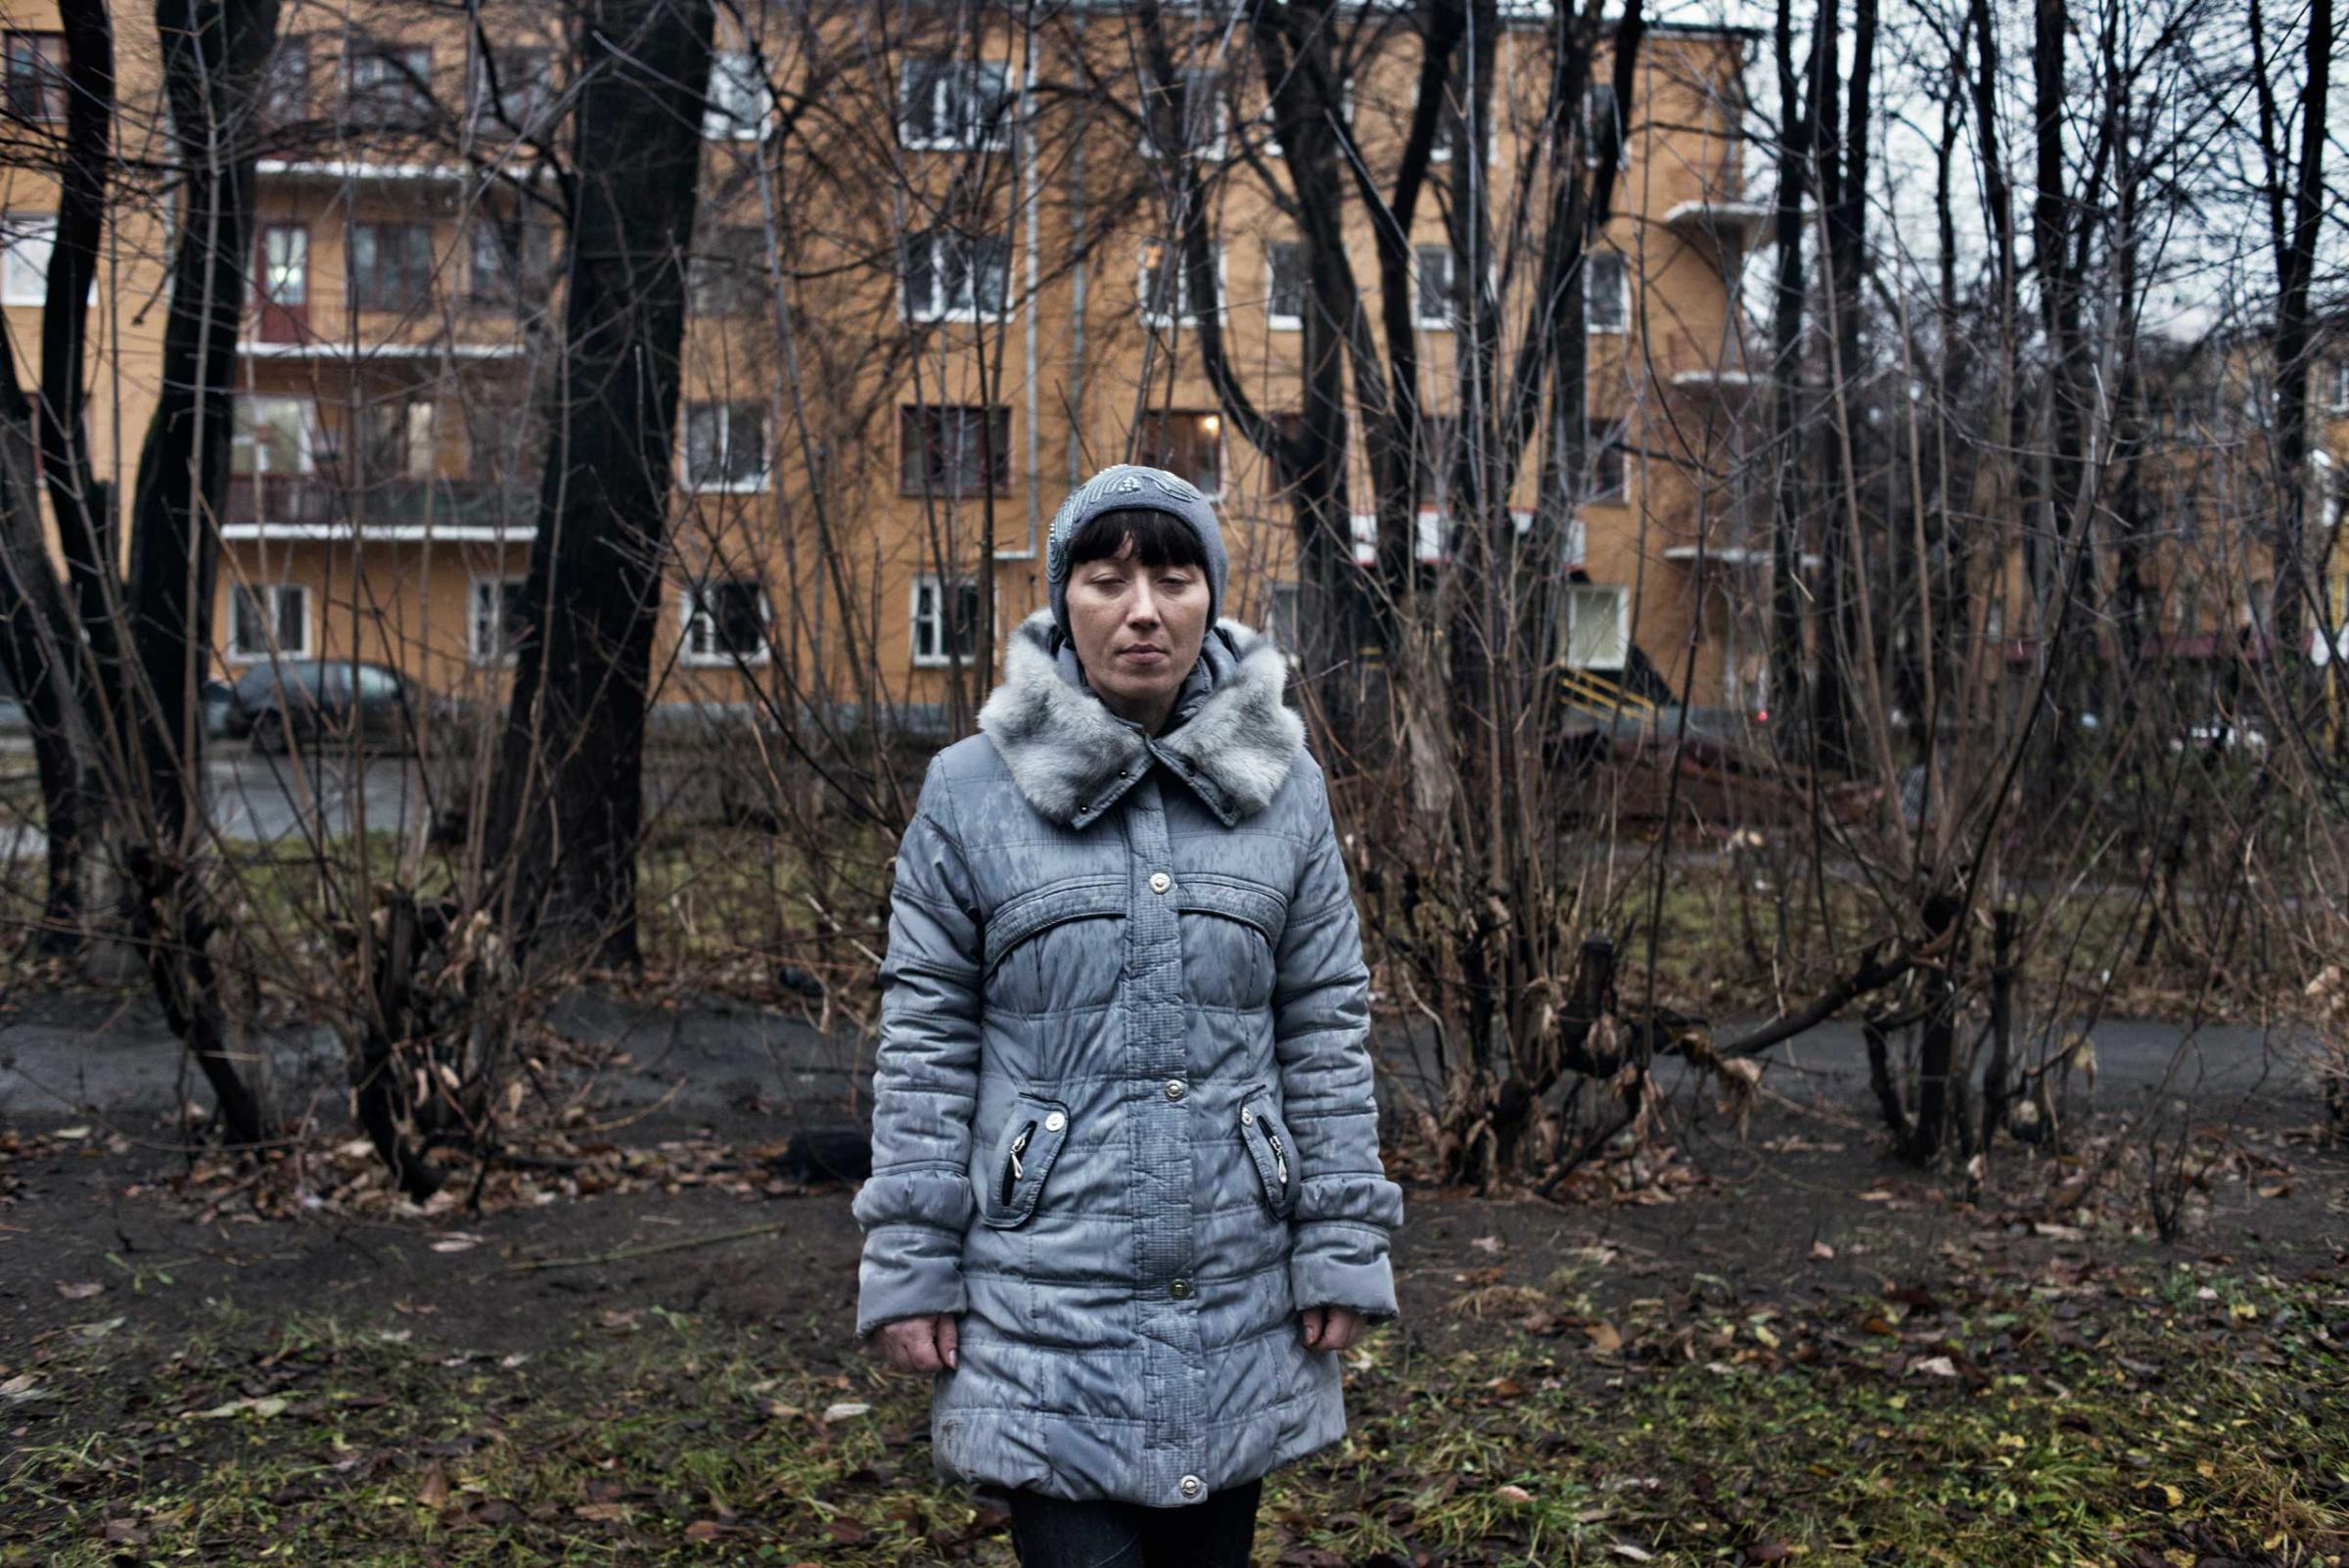 Zhanna, 34 years old, is out in the Uralmash district about thirty minutes after she has taken krokodil.